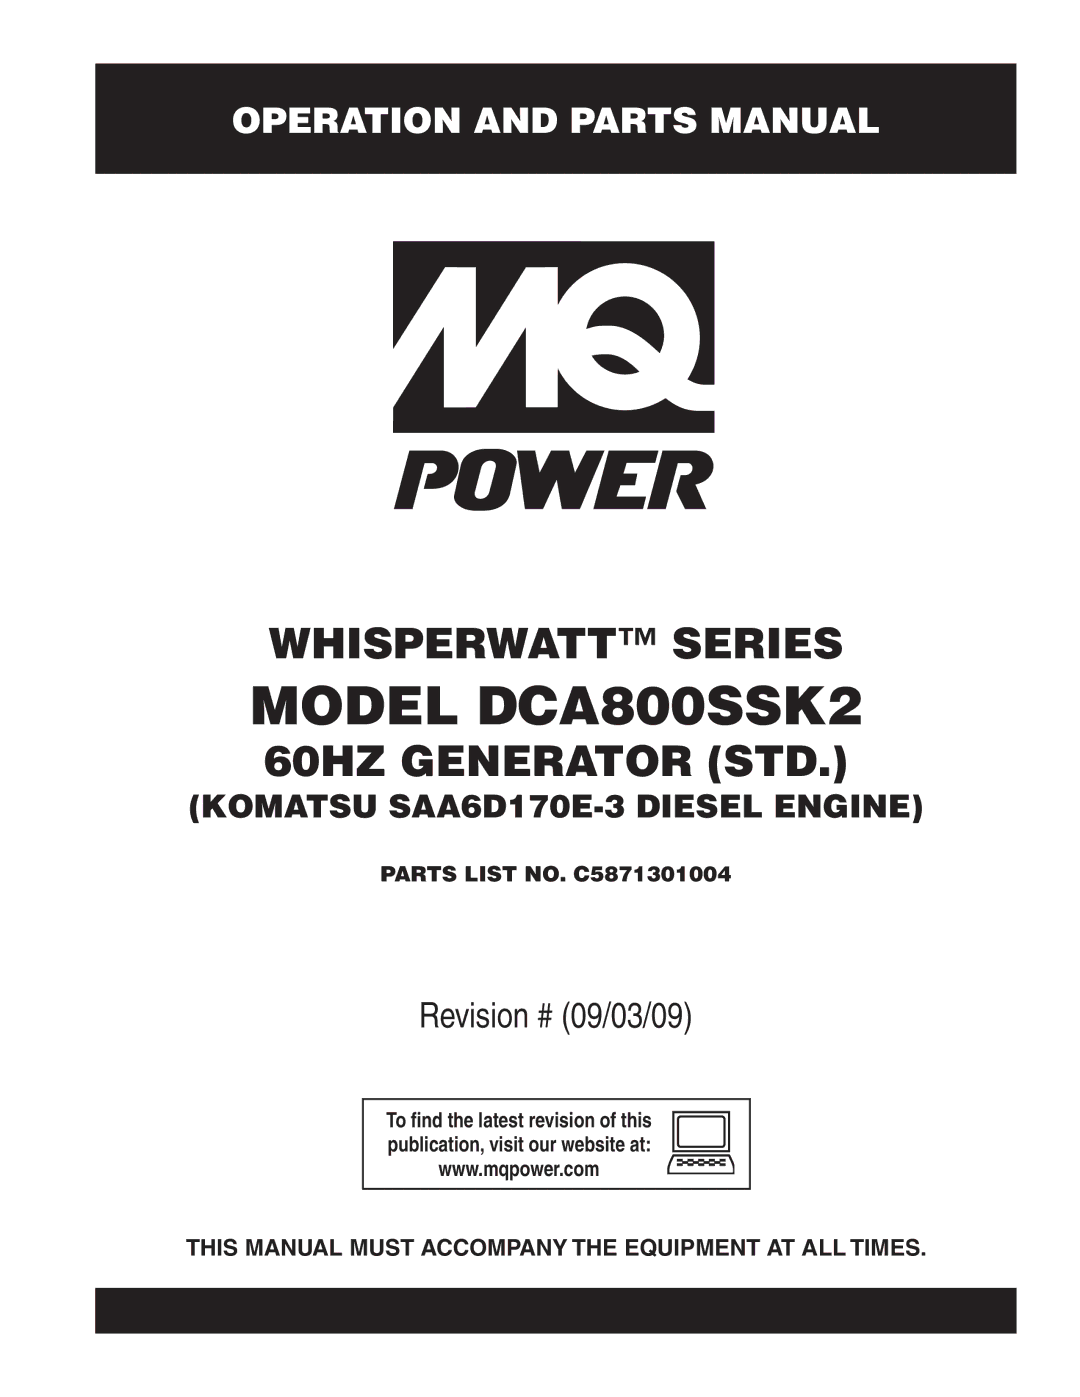 Multiquip manual Model DCA800SSK2, This Manual Must Accompany the Equipment AT ALL Times 